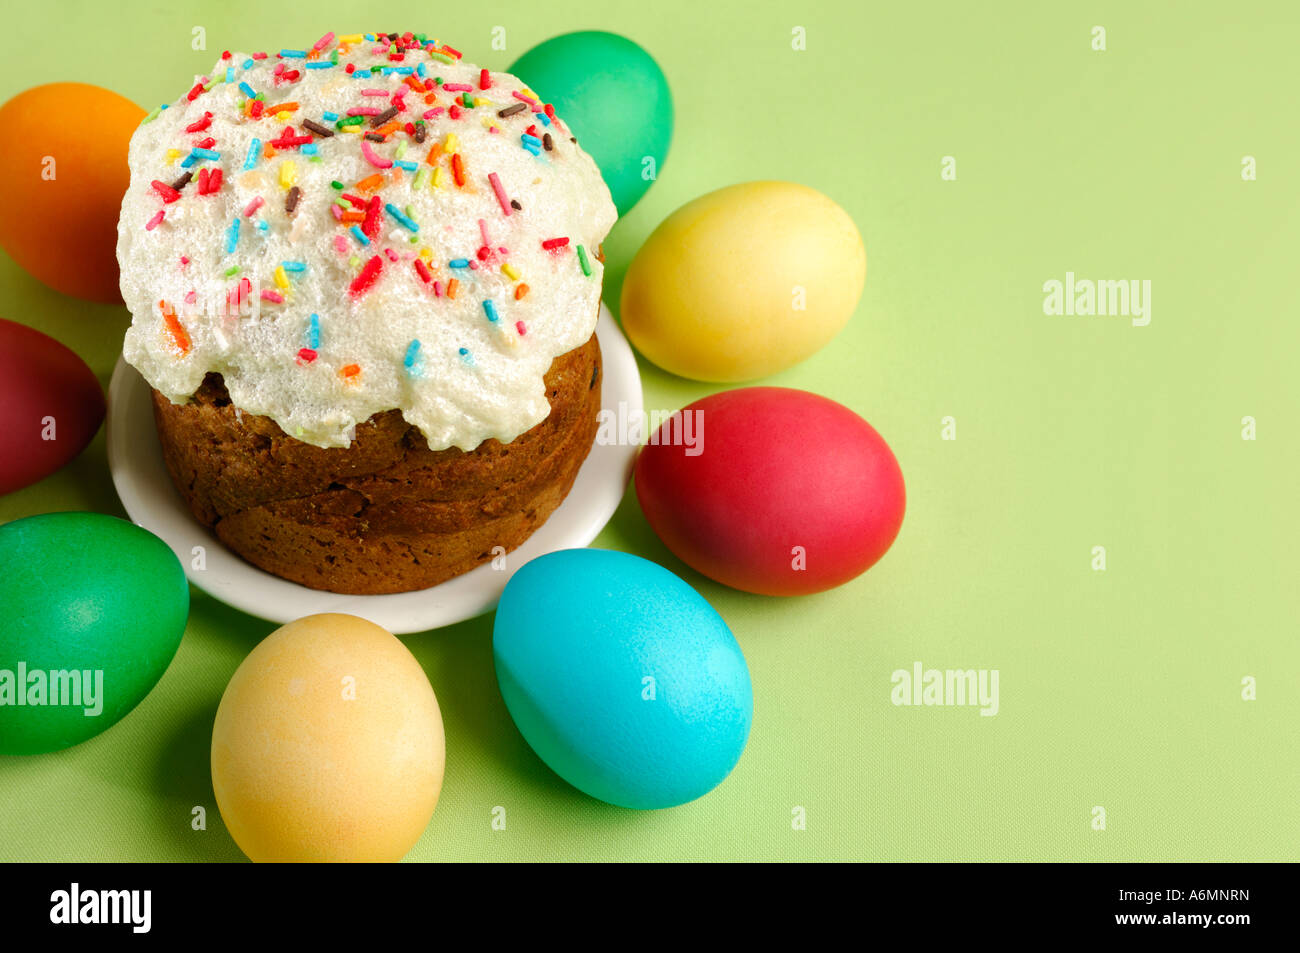 Easter cake and colorful Easter eggs on green Stock Photo